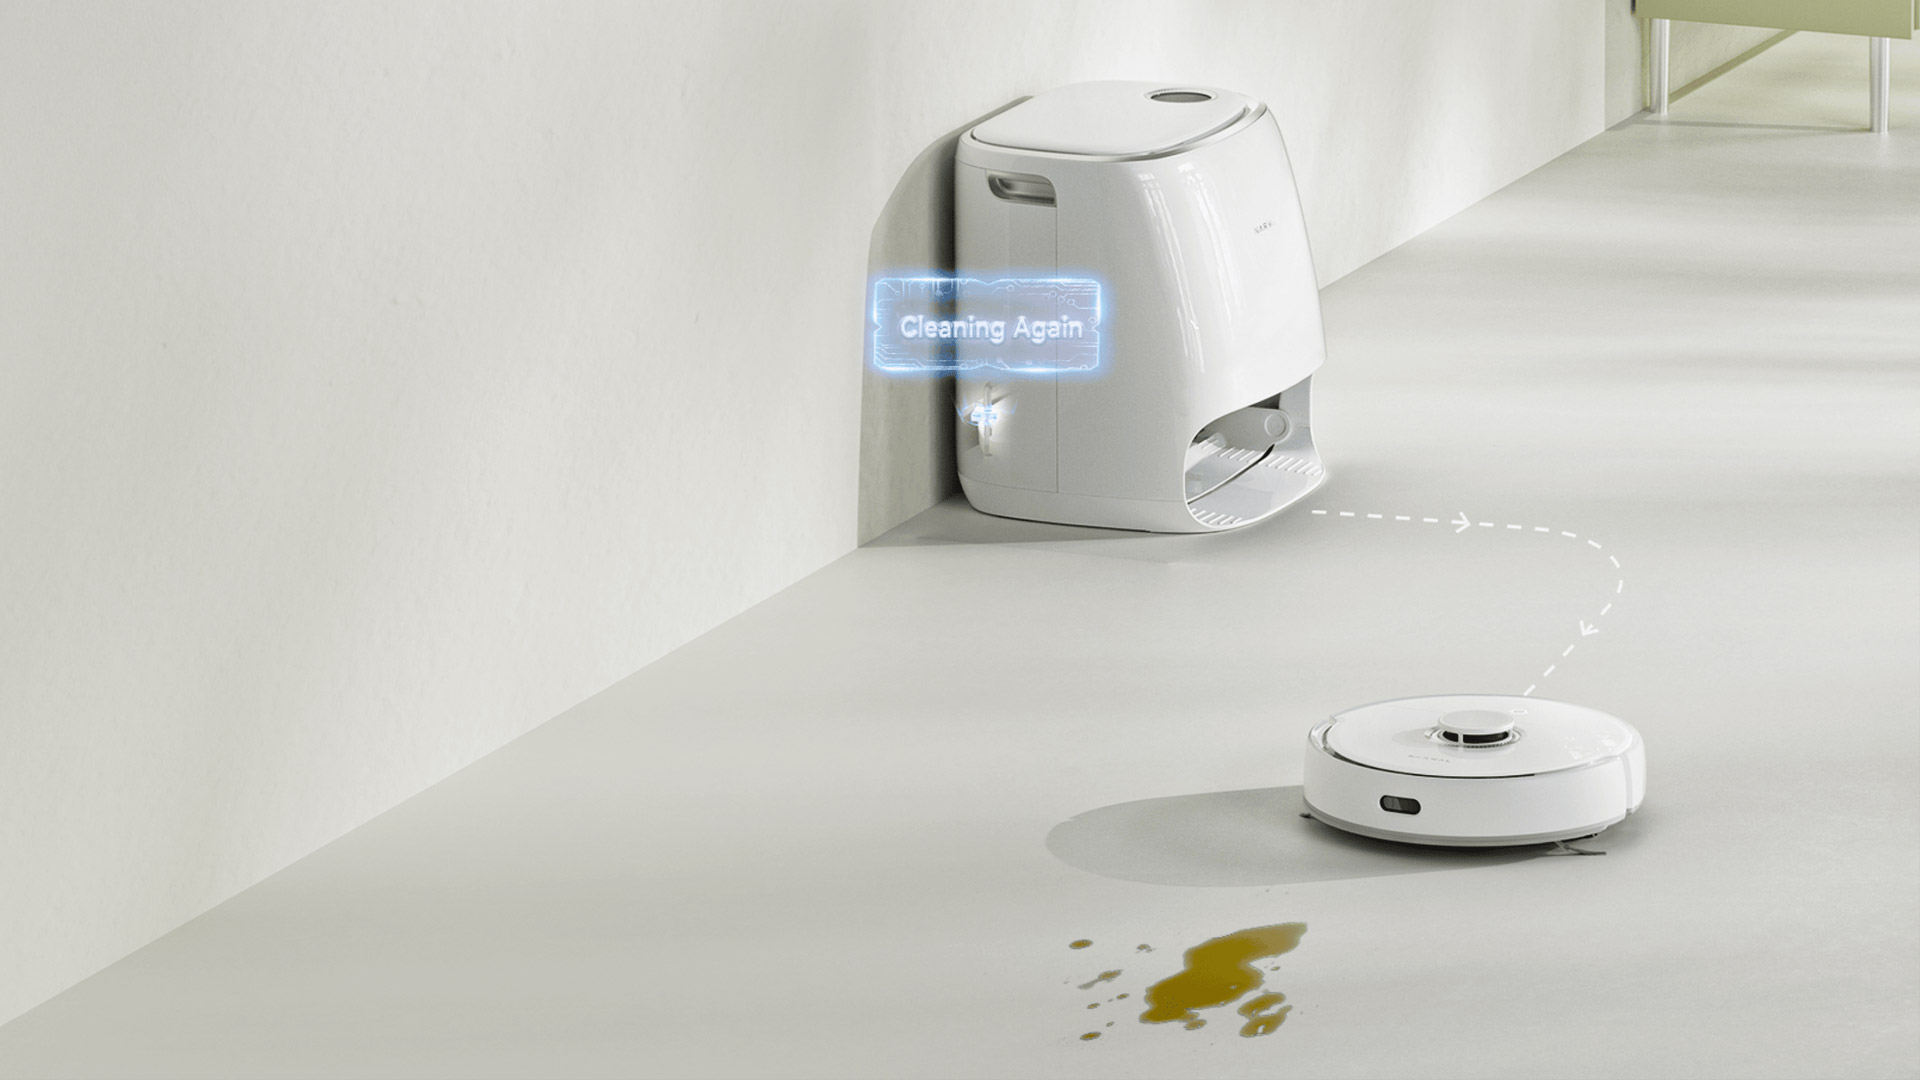 Narwal Freo robot vacuum cleaner is the first with AI DirtSense technology for smarter cleaning